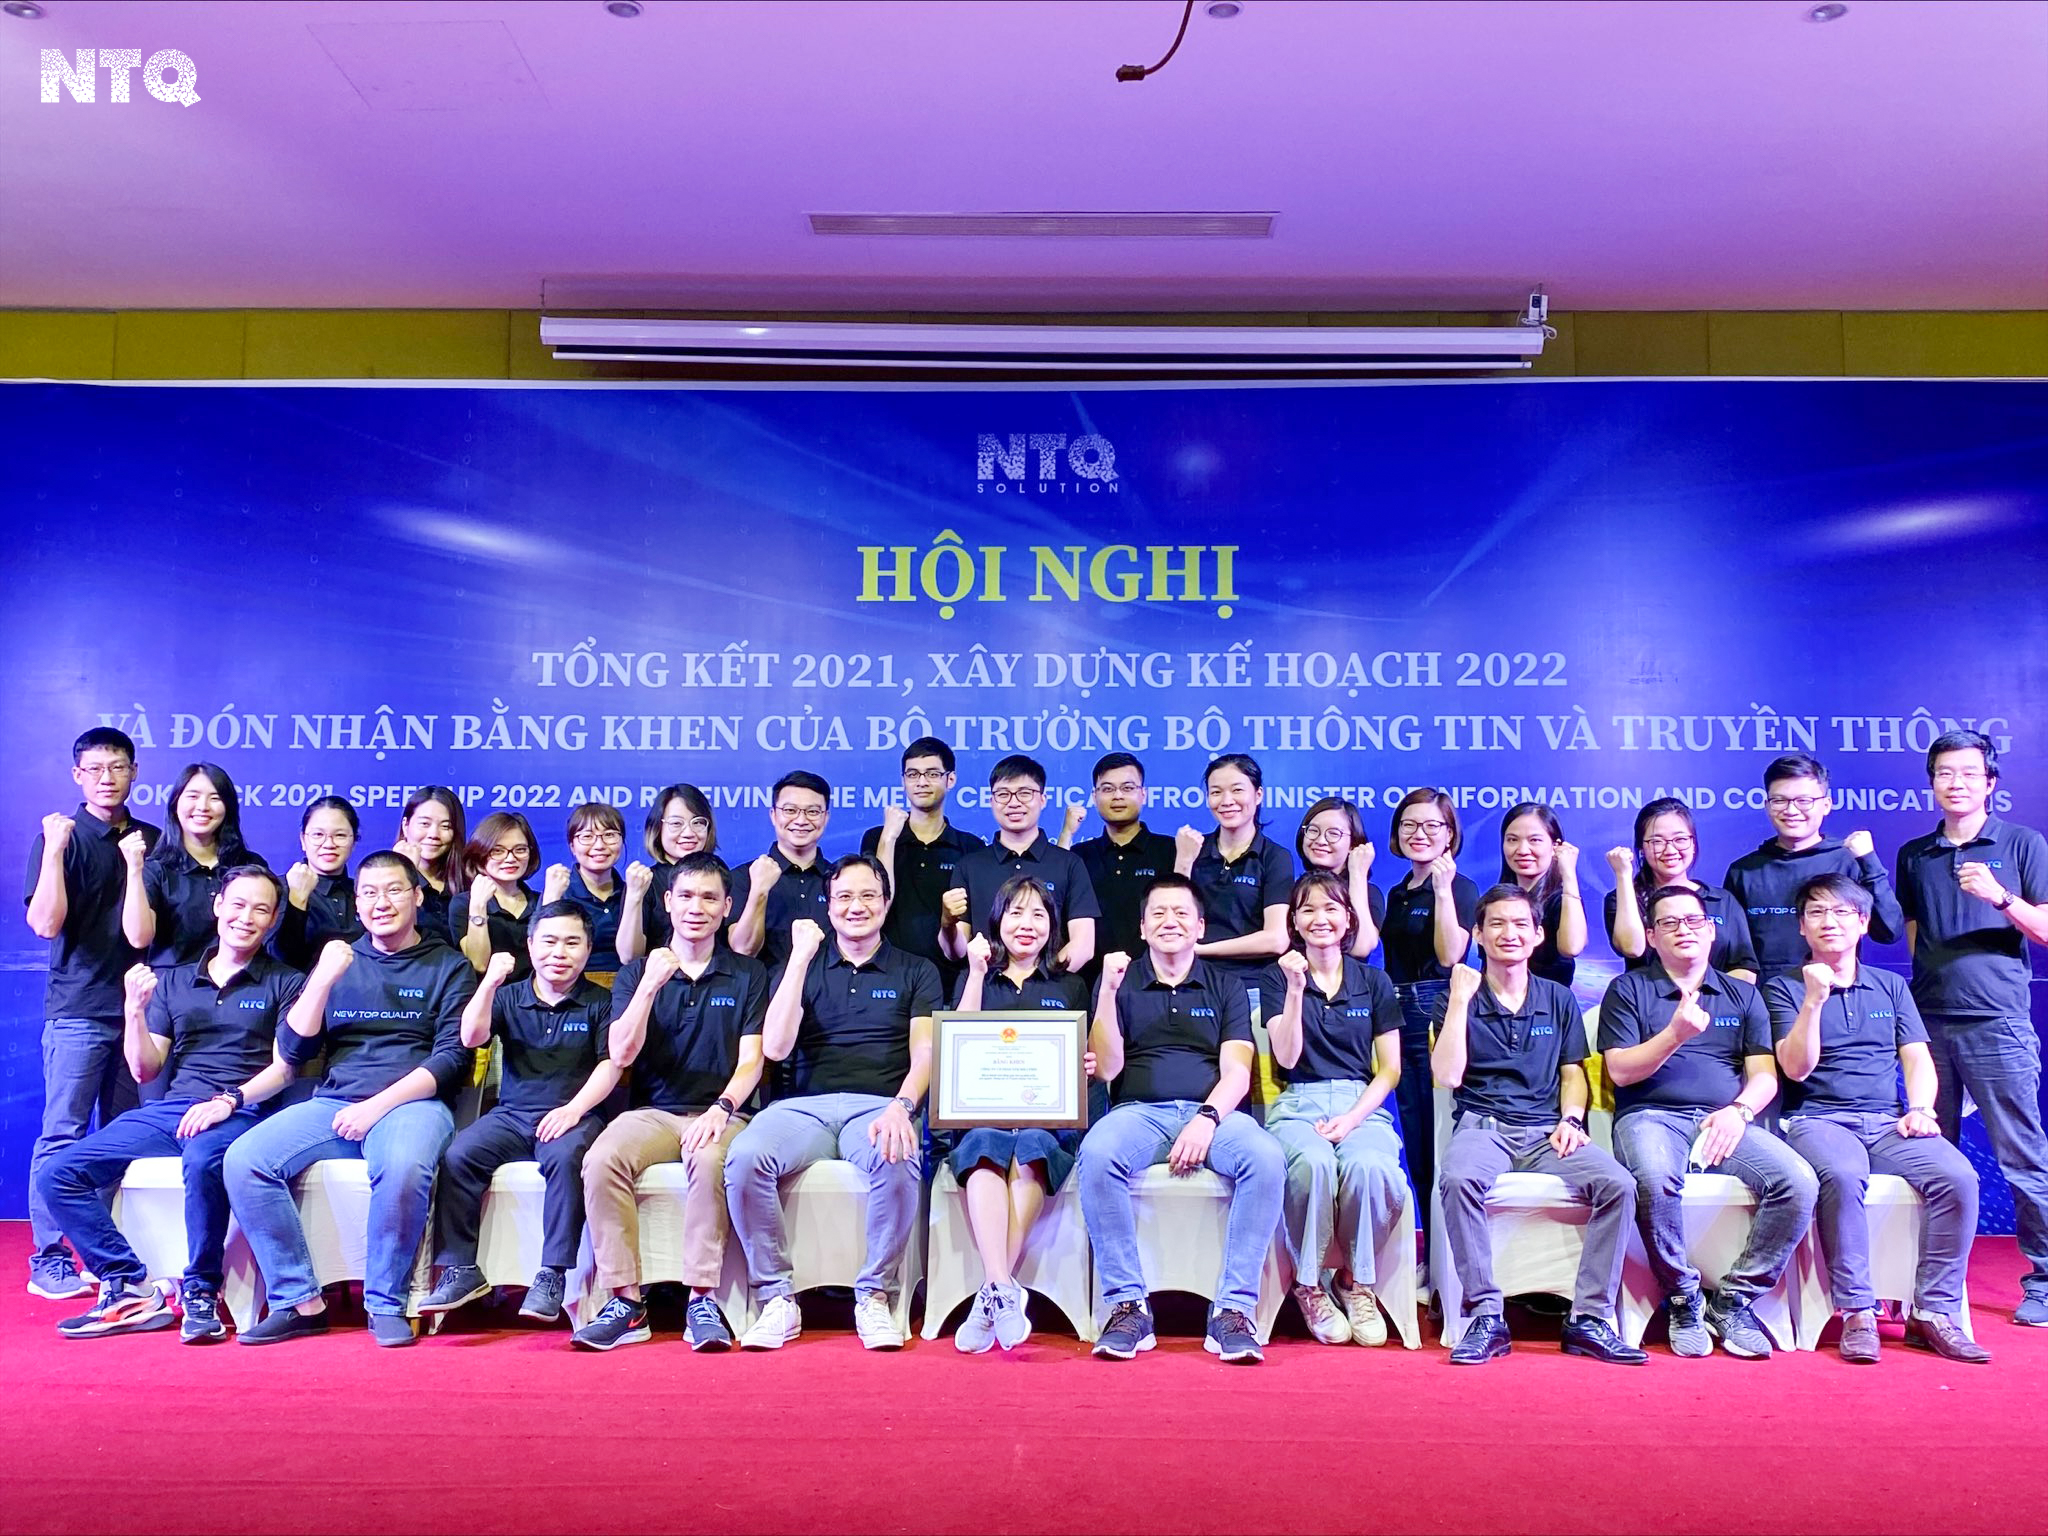 NTQ’s Milestones In 2021-2022 That Help NTQ Be Honored In The “TOP 10 Vietnam IT Companies” 2022